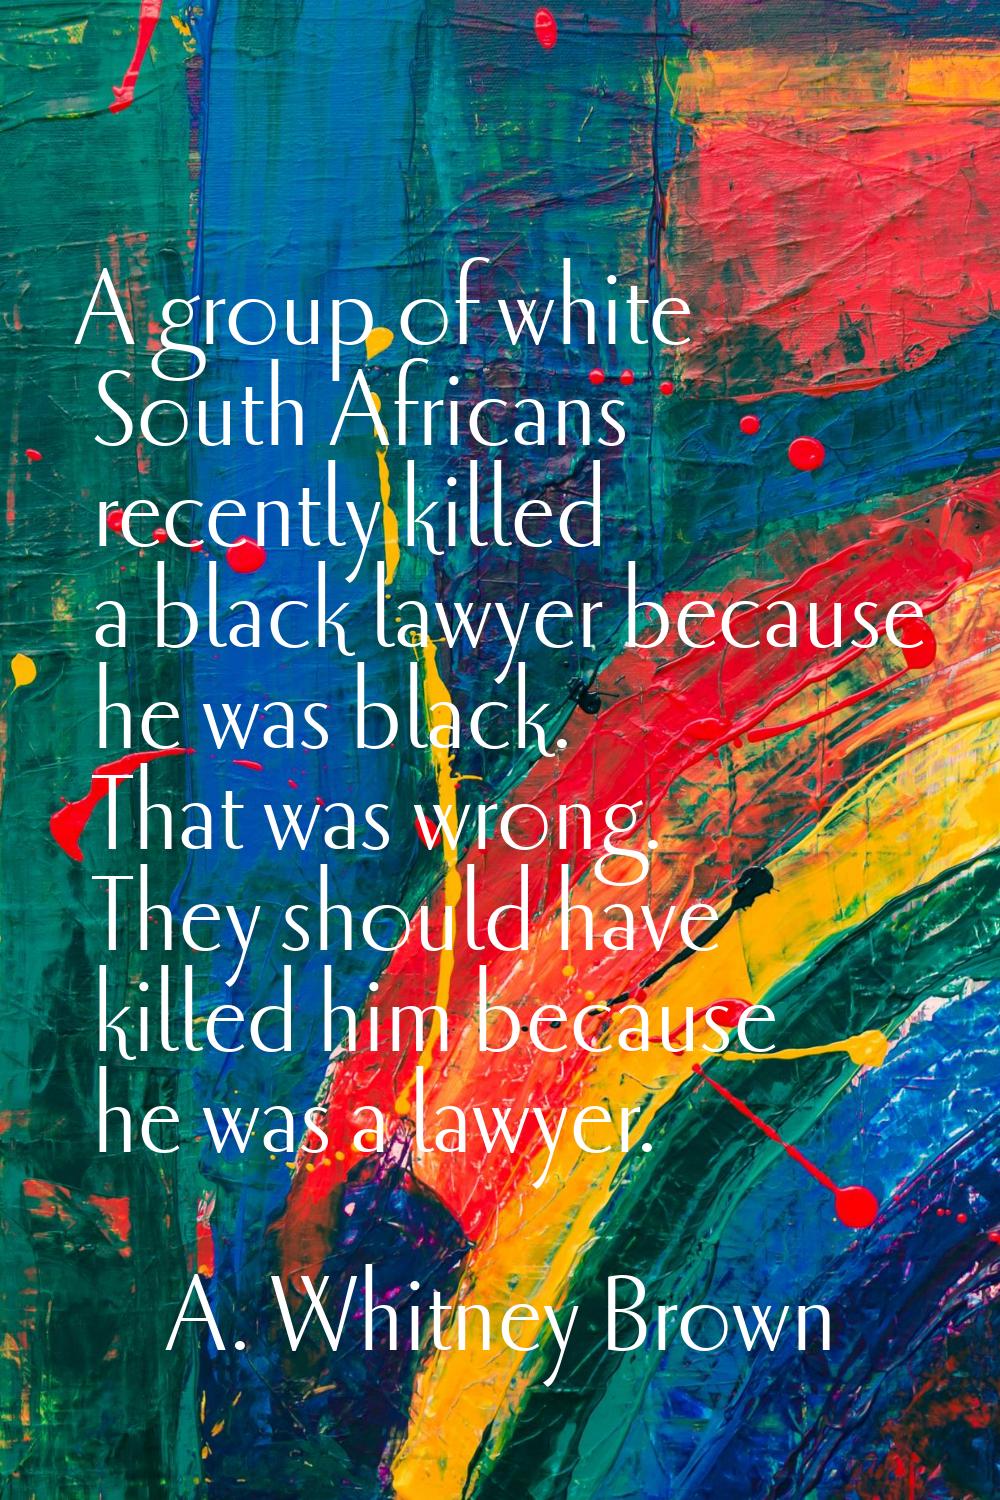 A group of white South Africans recently killed a black lawyer because he was black. That was wrong